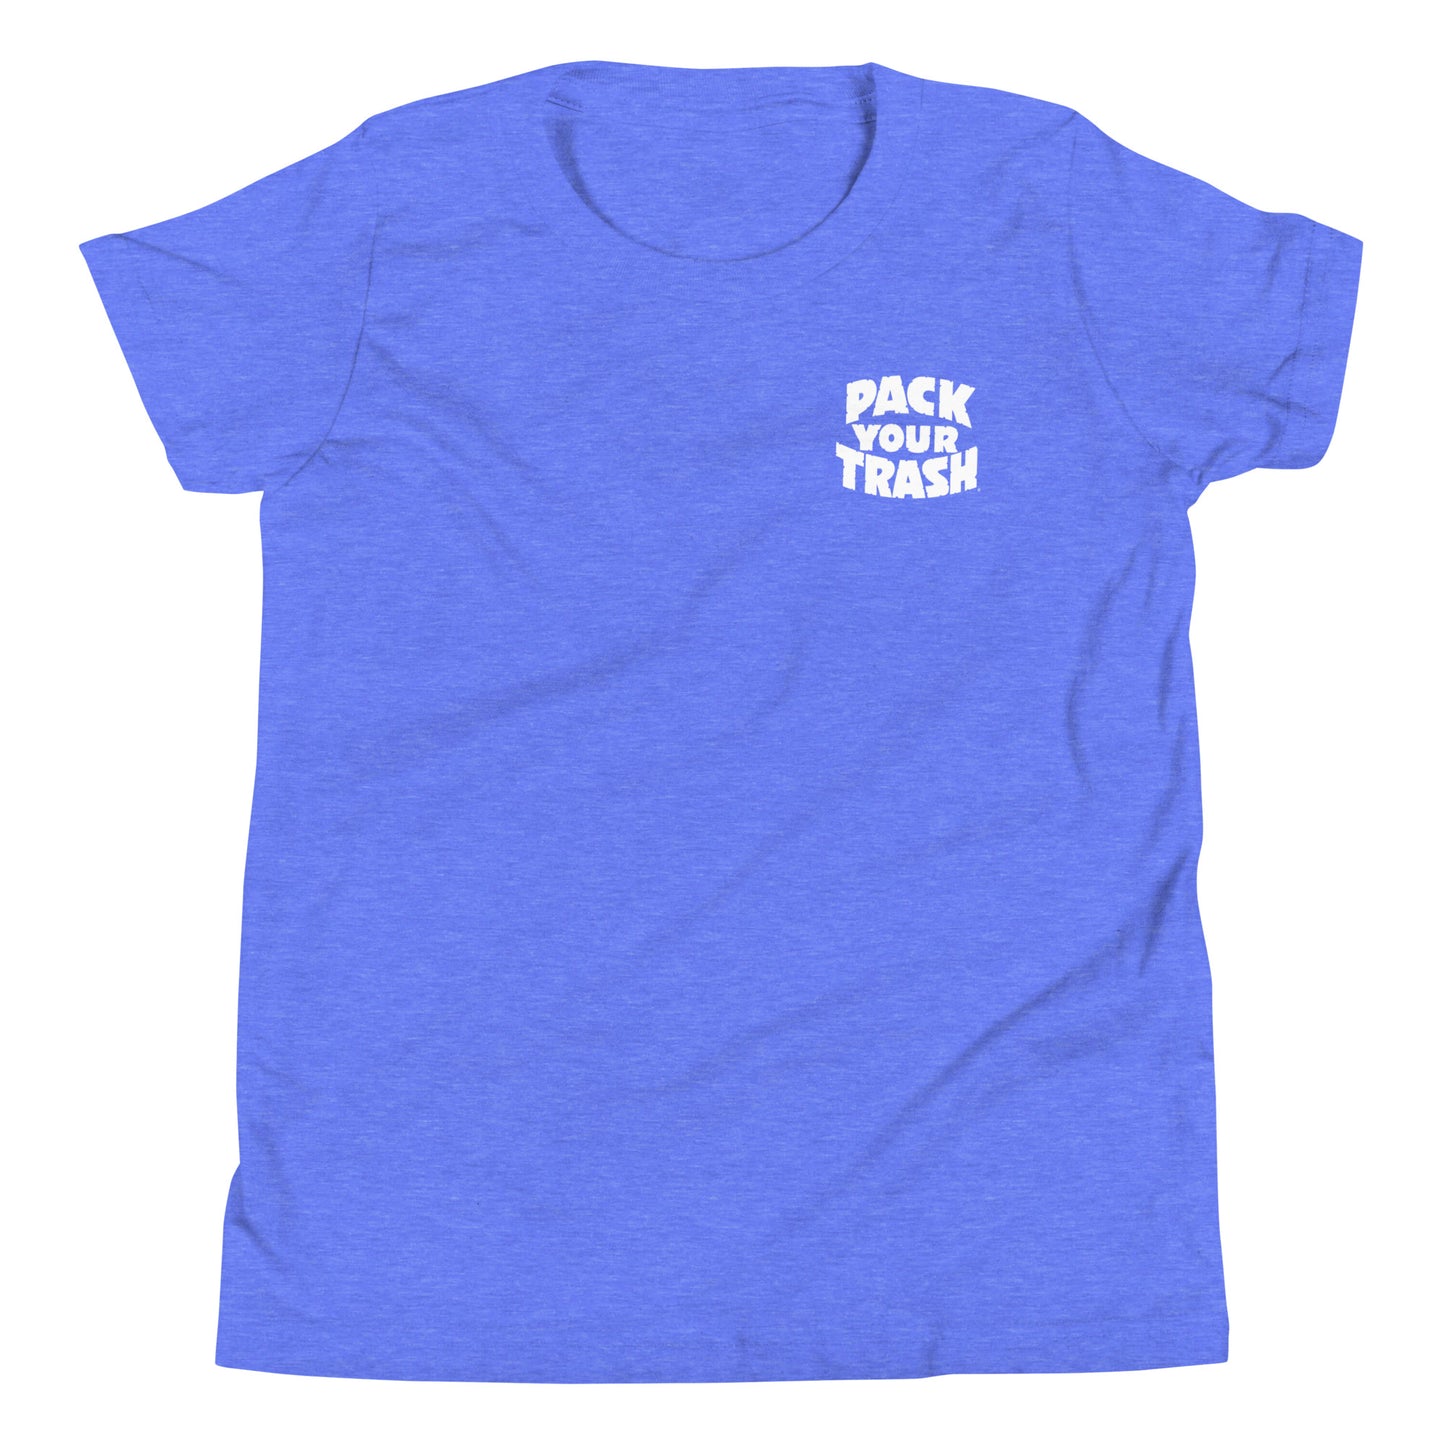 Pack Your Trash - Surfer Geek - Youth Short Sleeve T-Shirt